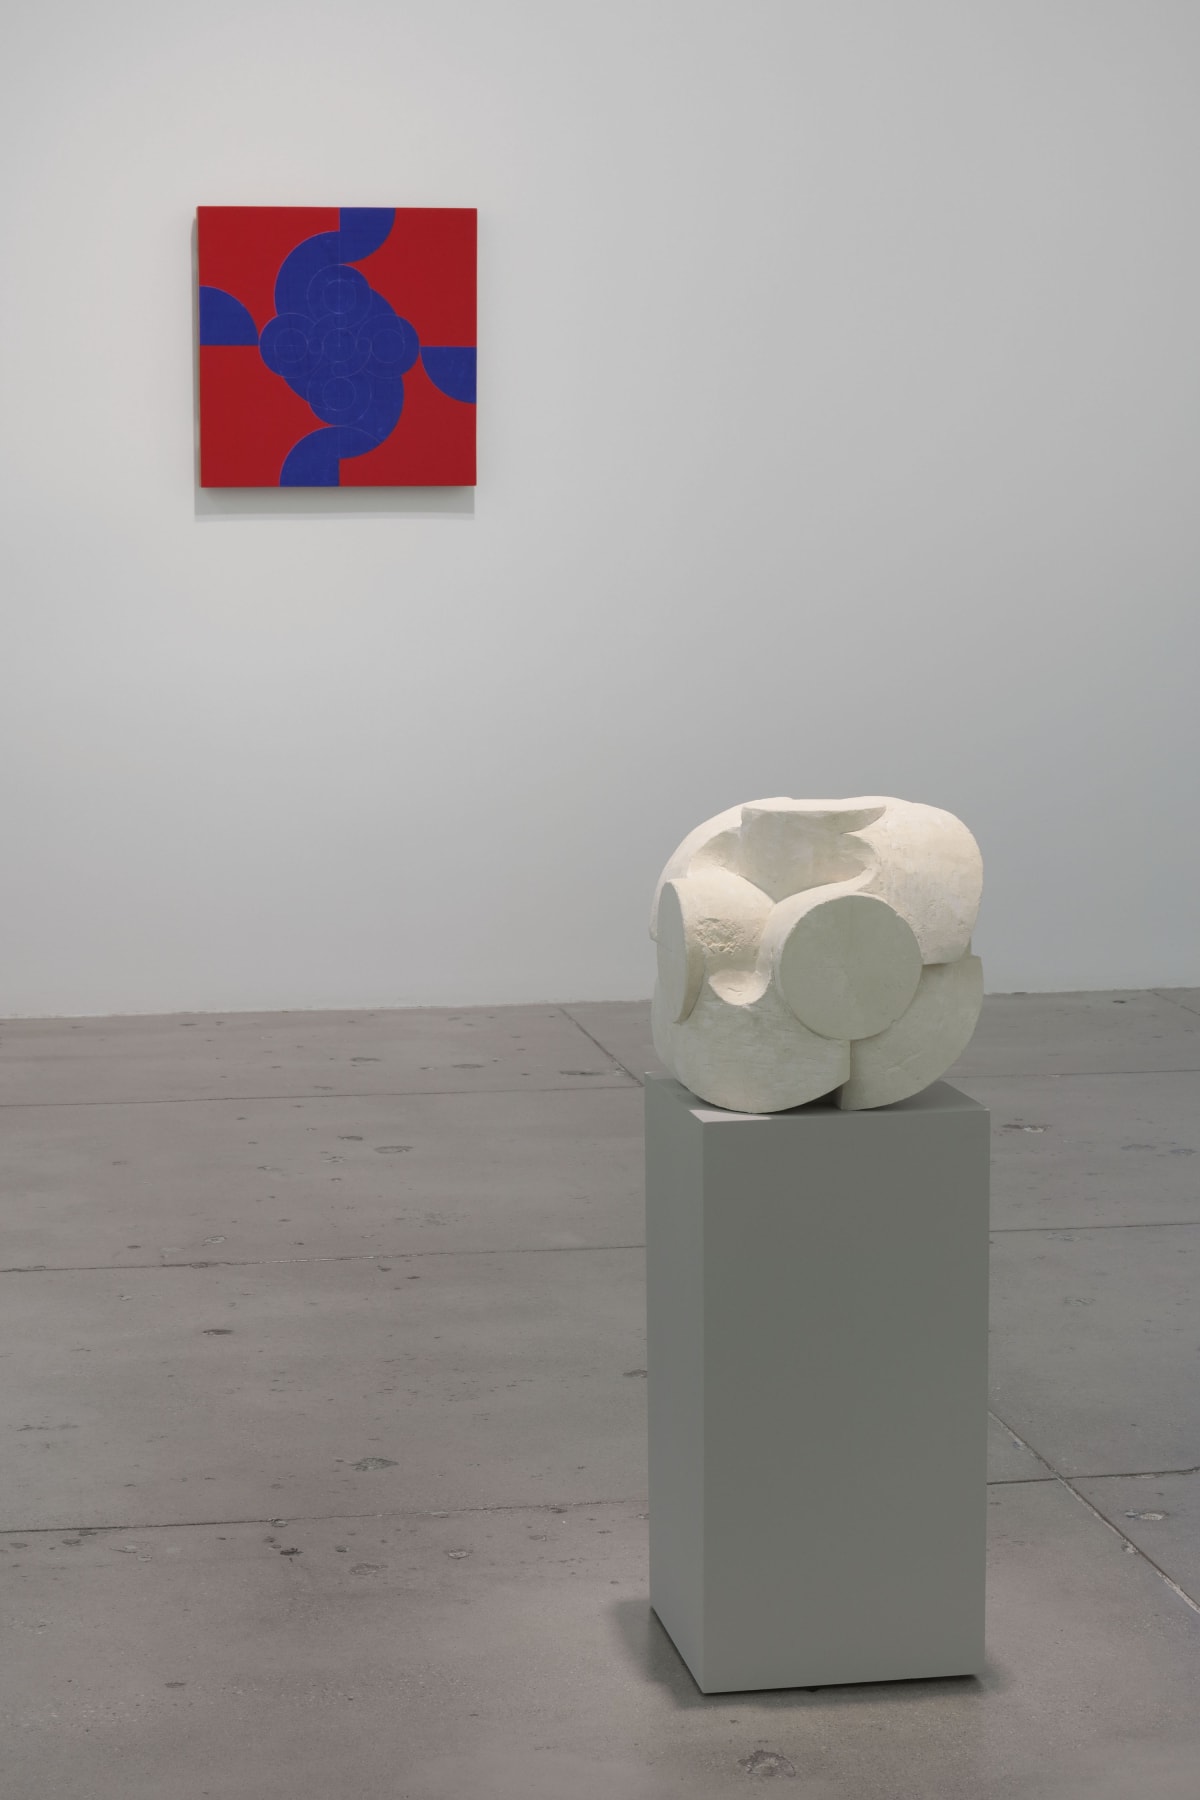 In a large white space, a small red and blue abstract painting hangs on the wall in front of 1 small, white stone sculpture.